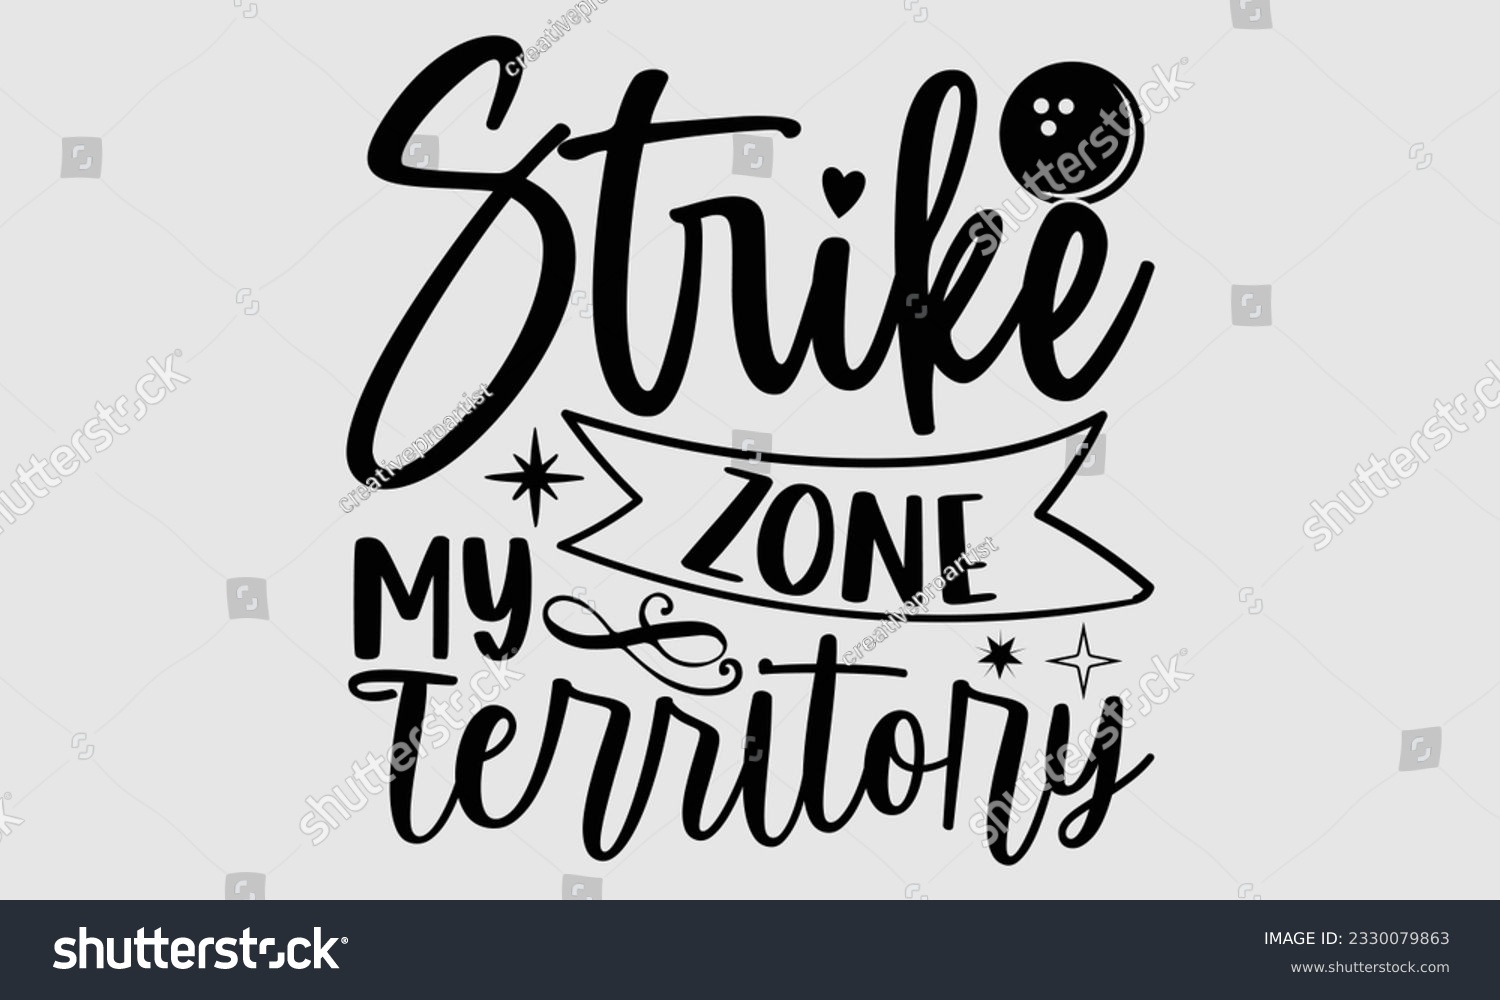 SVG of Strike Zone My Territory- Bowling t-shirt design, Handmade calligraphy vector Illustration for prints on SVG and bags, posters, greeting card template EPS svg